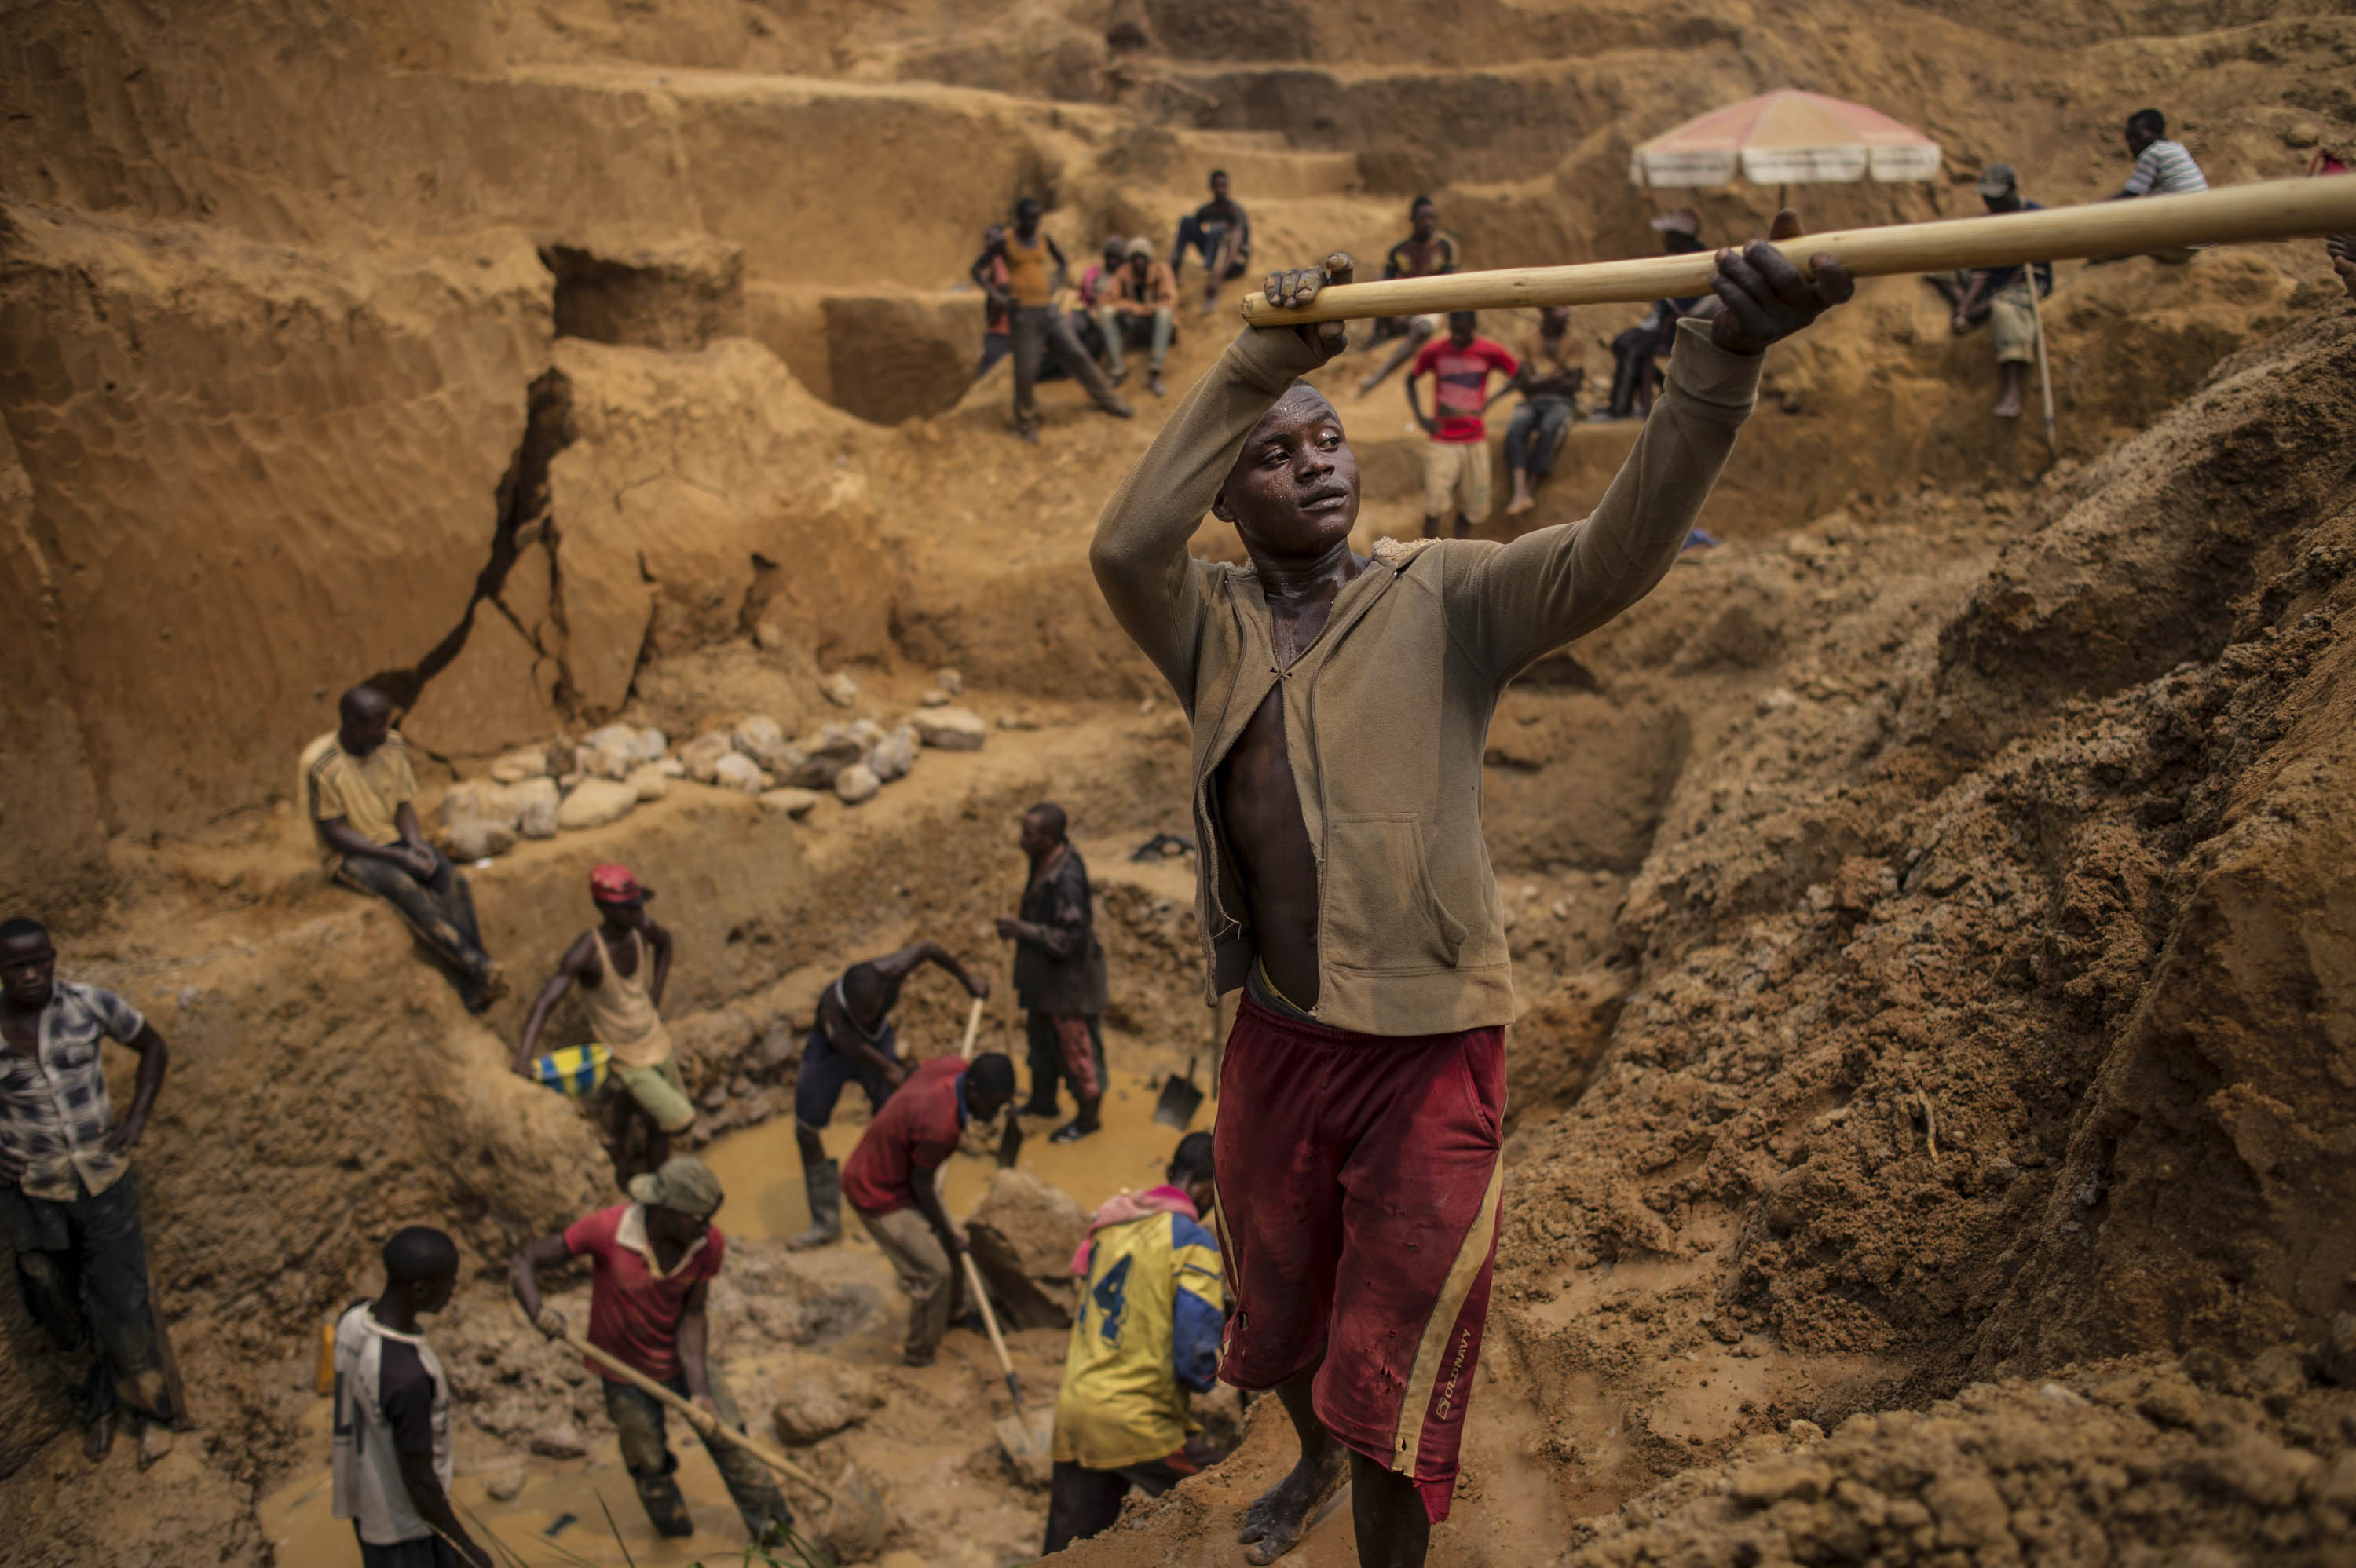 Congolese workers search for rough diamonds Kangambala mine in Lunged, in the south west region of Kasai in the Democratic Republic of Congo, the heart of the diamond mining area in the DRC, August 9, 2015.From  Inside the Democratic Republic of Congo’s Diamond Mines